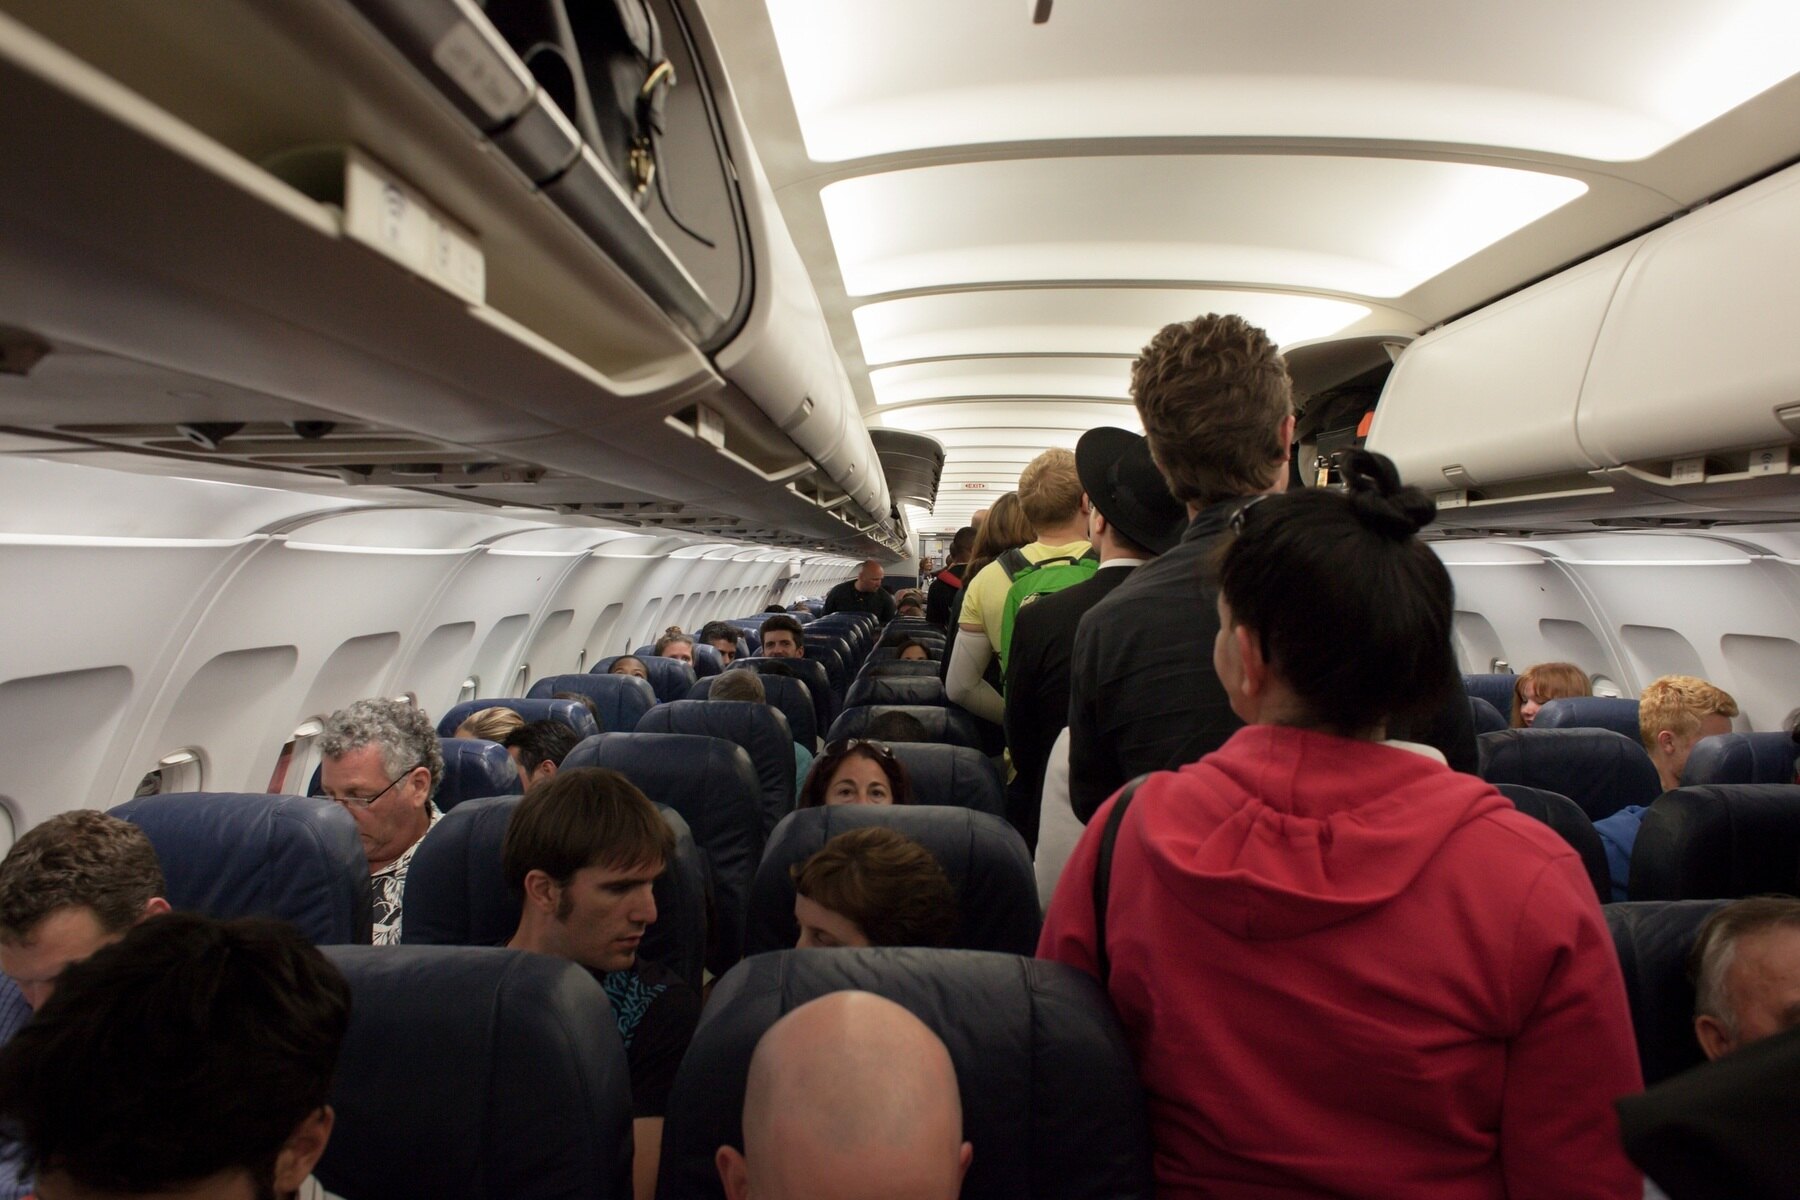  People sitting on a plane